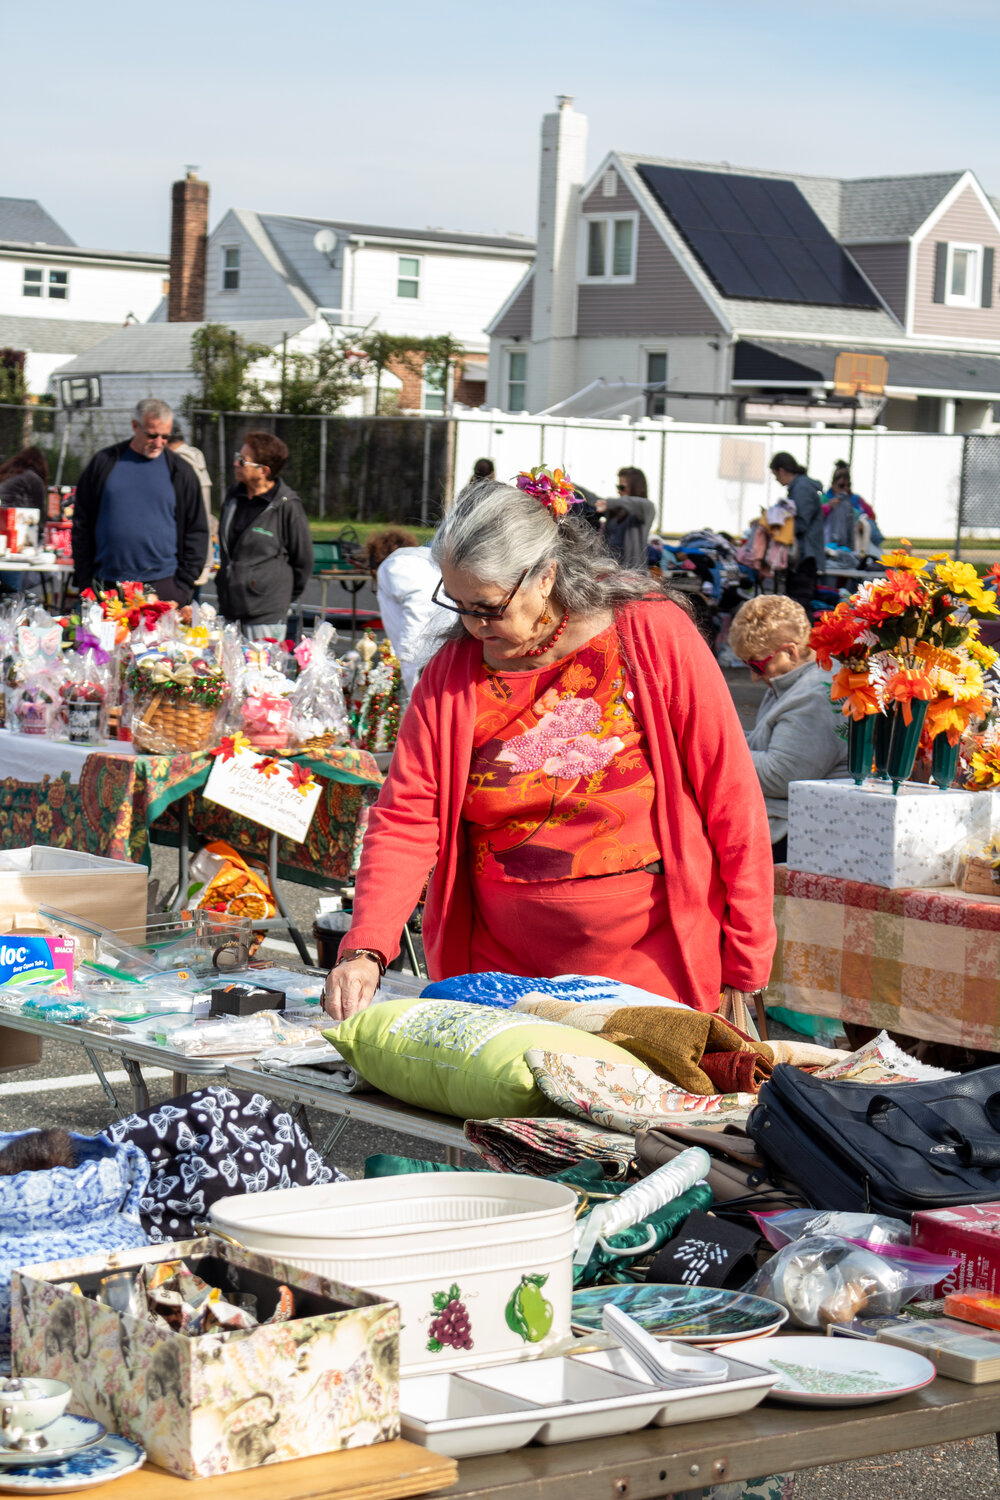 Dee Palser came from Valley Stream to get a great deal on all the seasonal items for sale at the Nov. 4 community yard sale in Franklin Square.